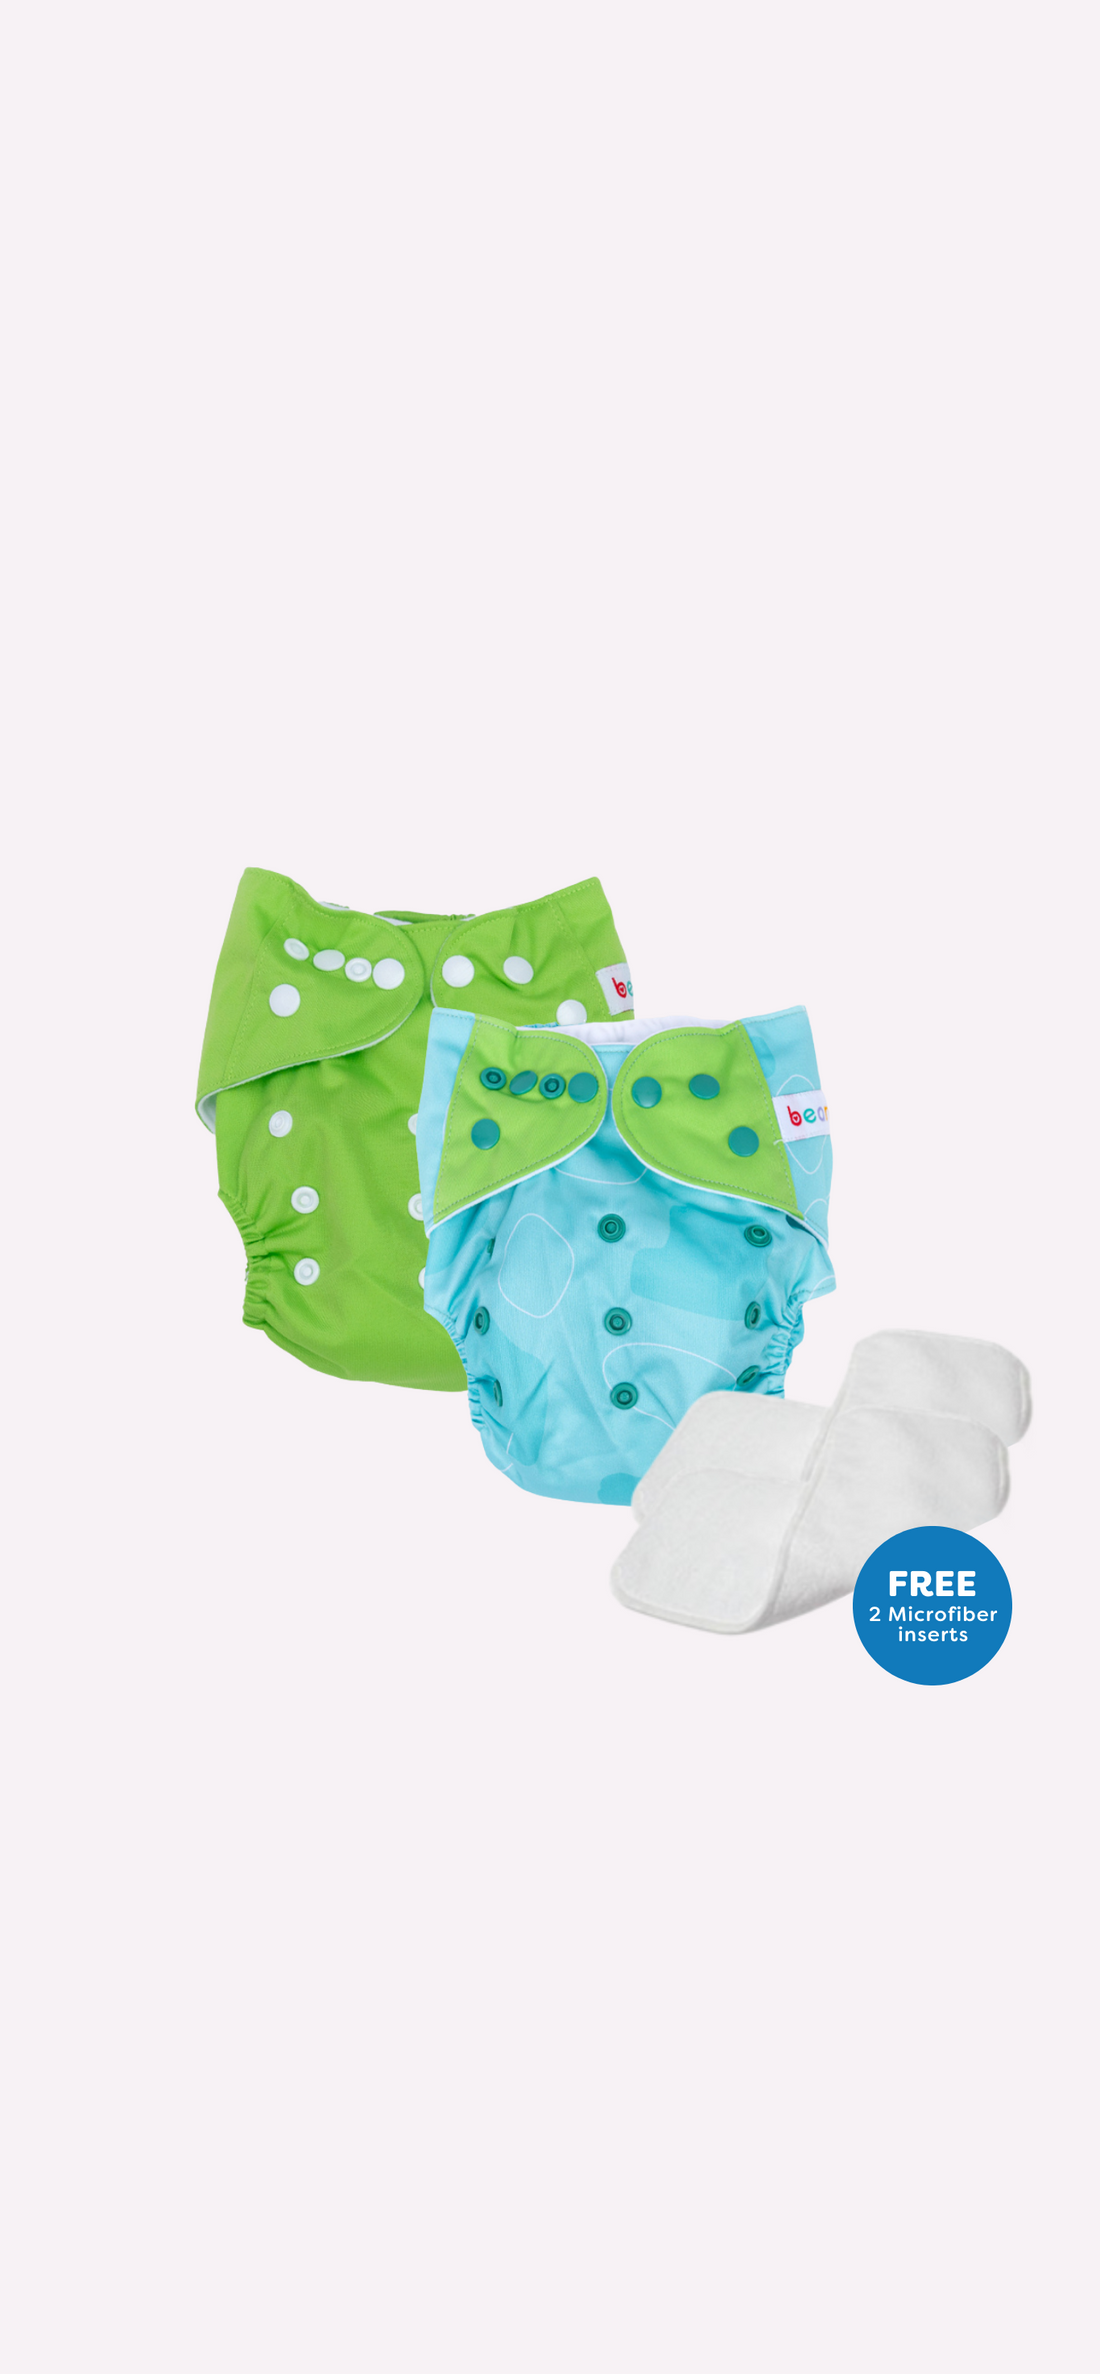 Snappies Lime Green Buddies Cloth Diaper Set of 2